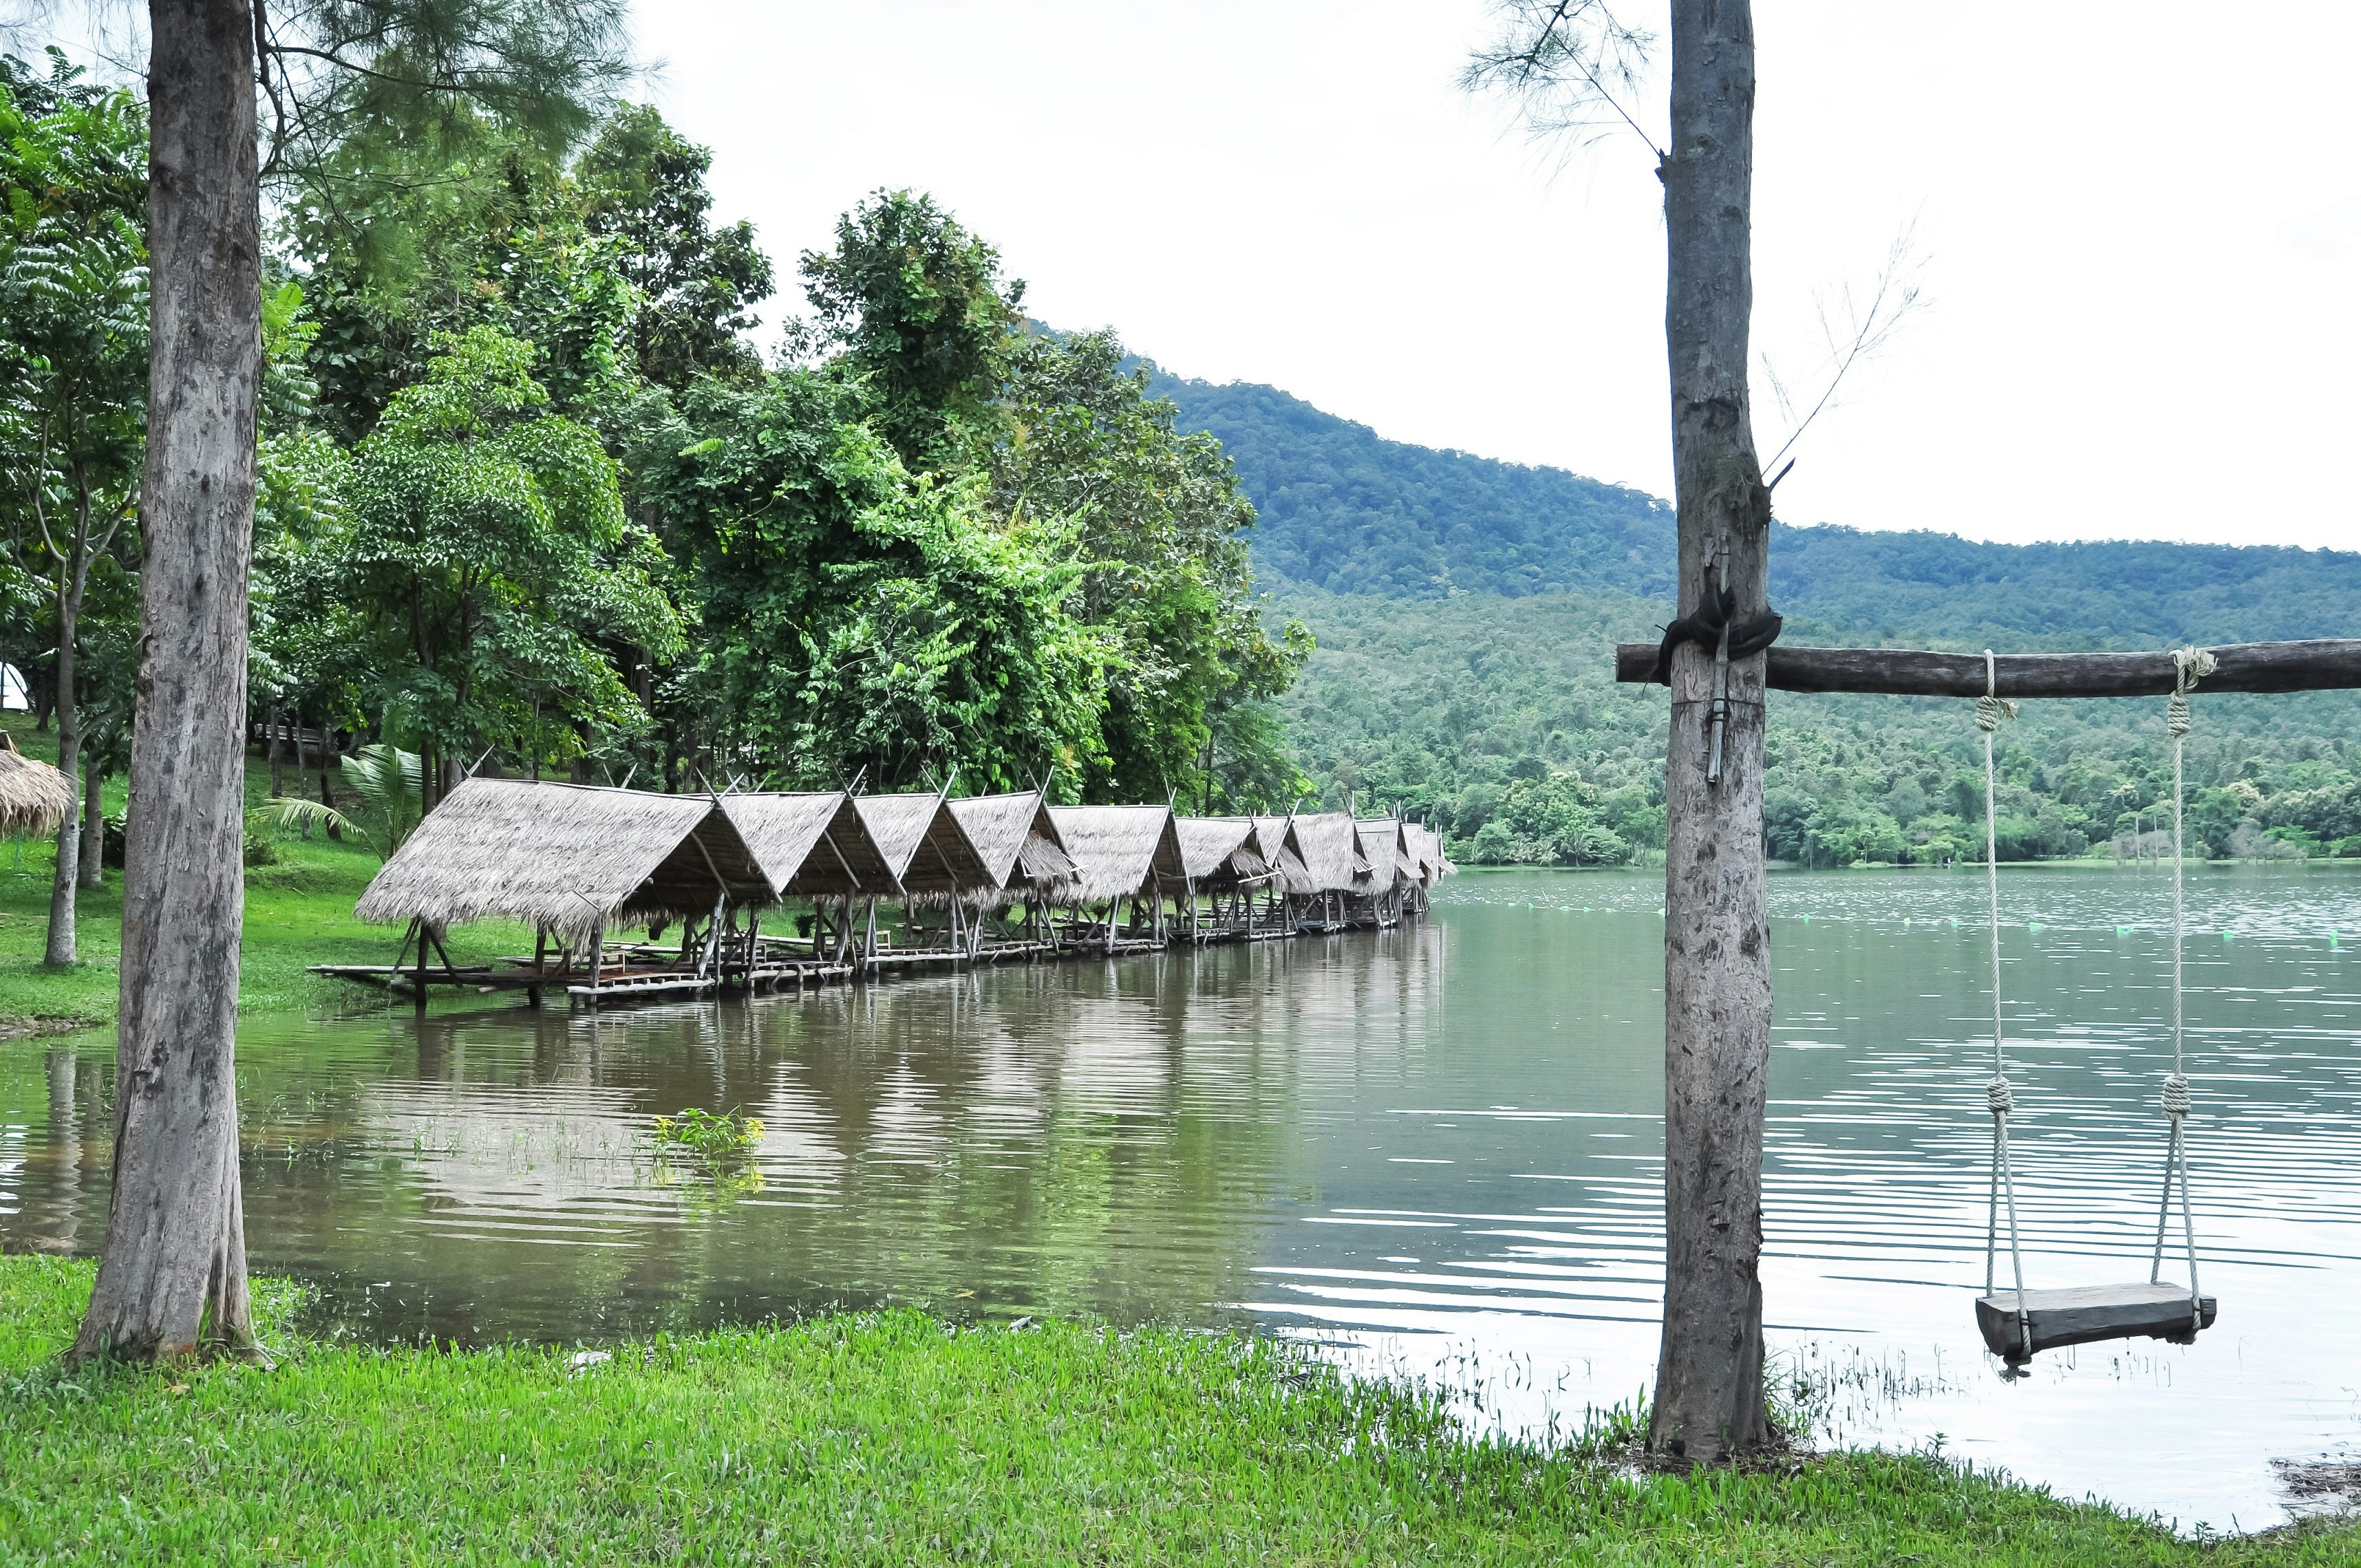 A line of bamboo huts stand at the edge of Huay Tung Tao, a man-made reservoir near Chiang Mai. A swing dangles from a tree in the foreground.